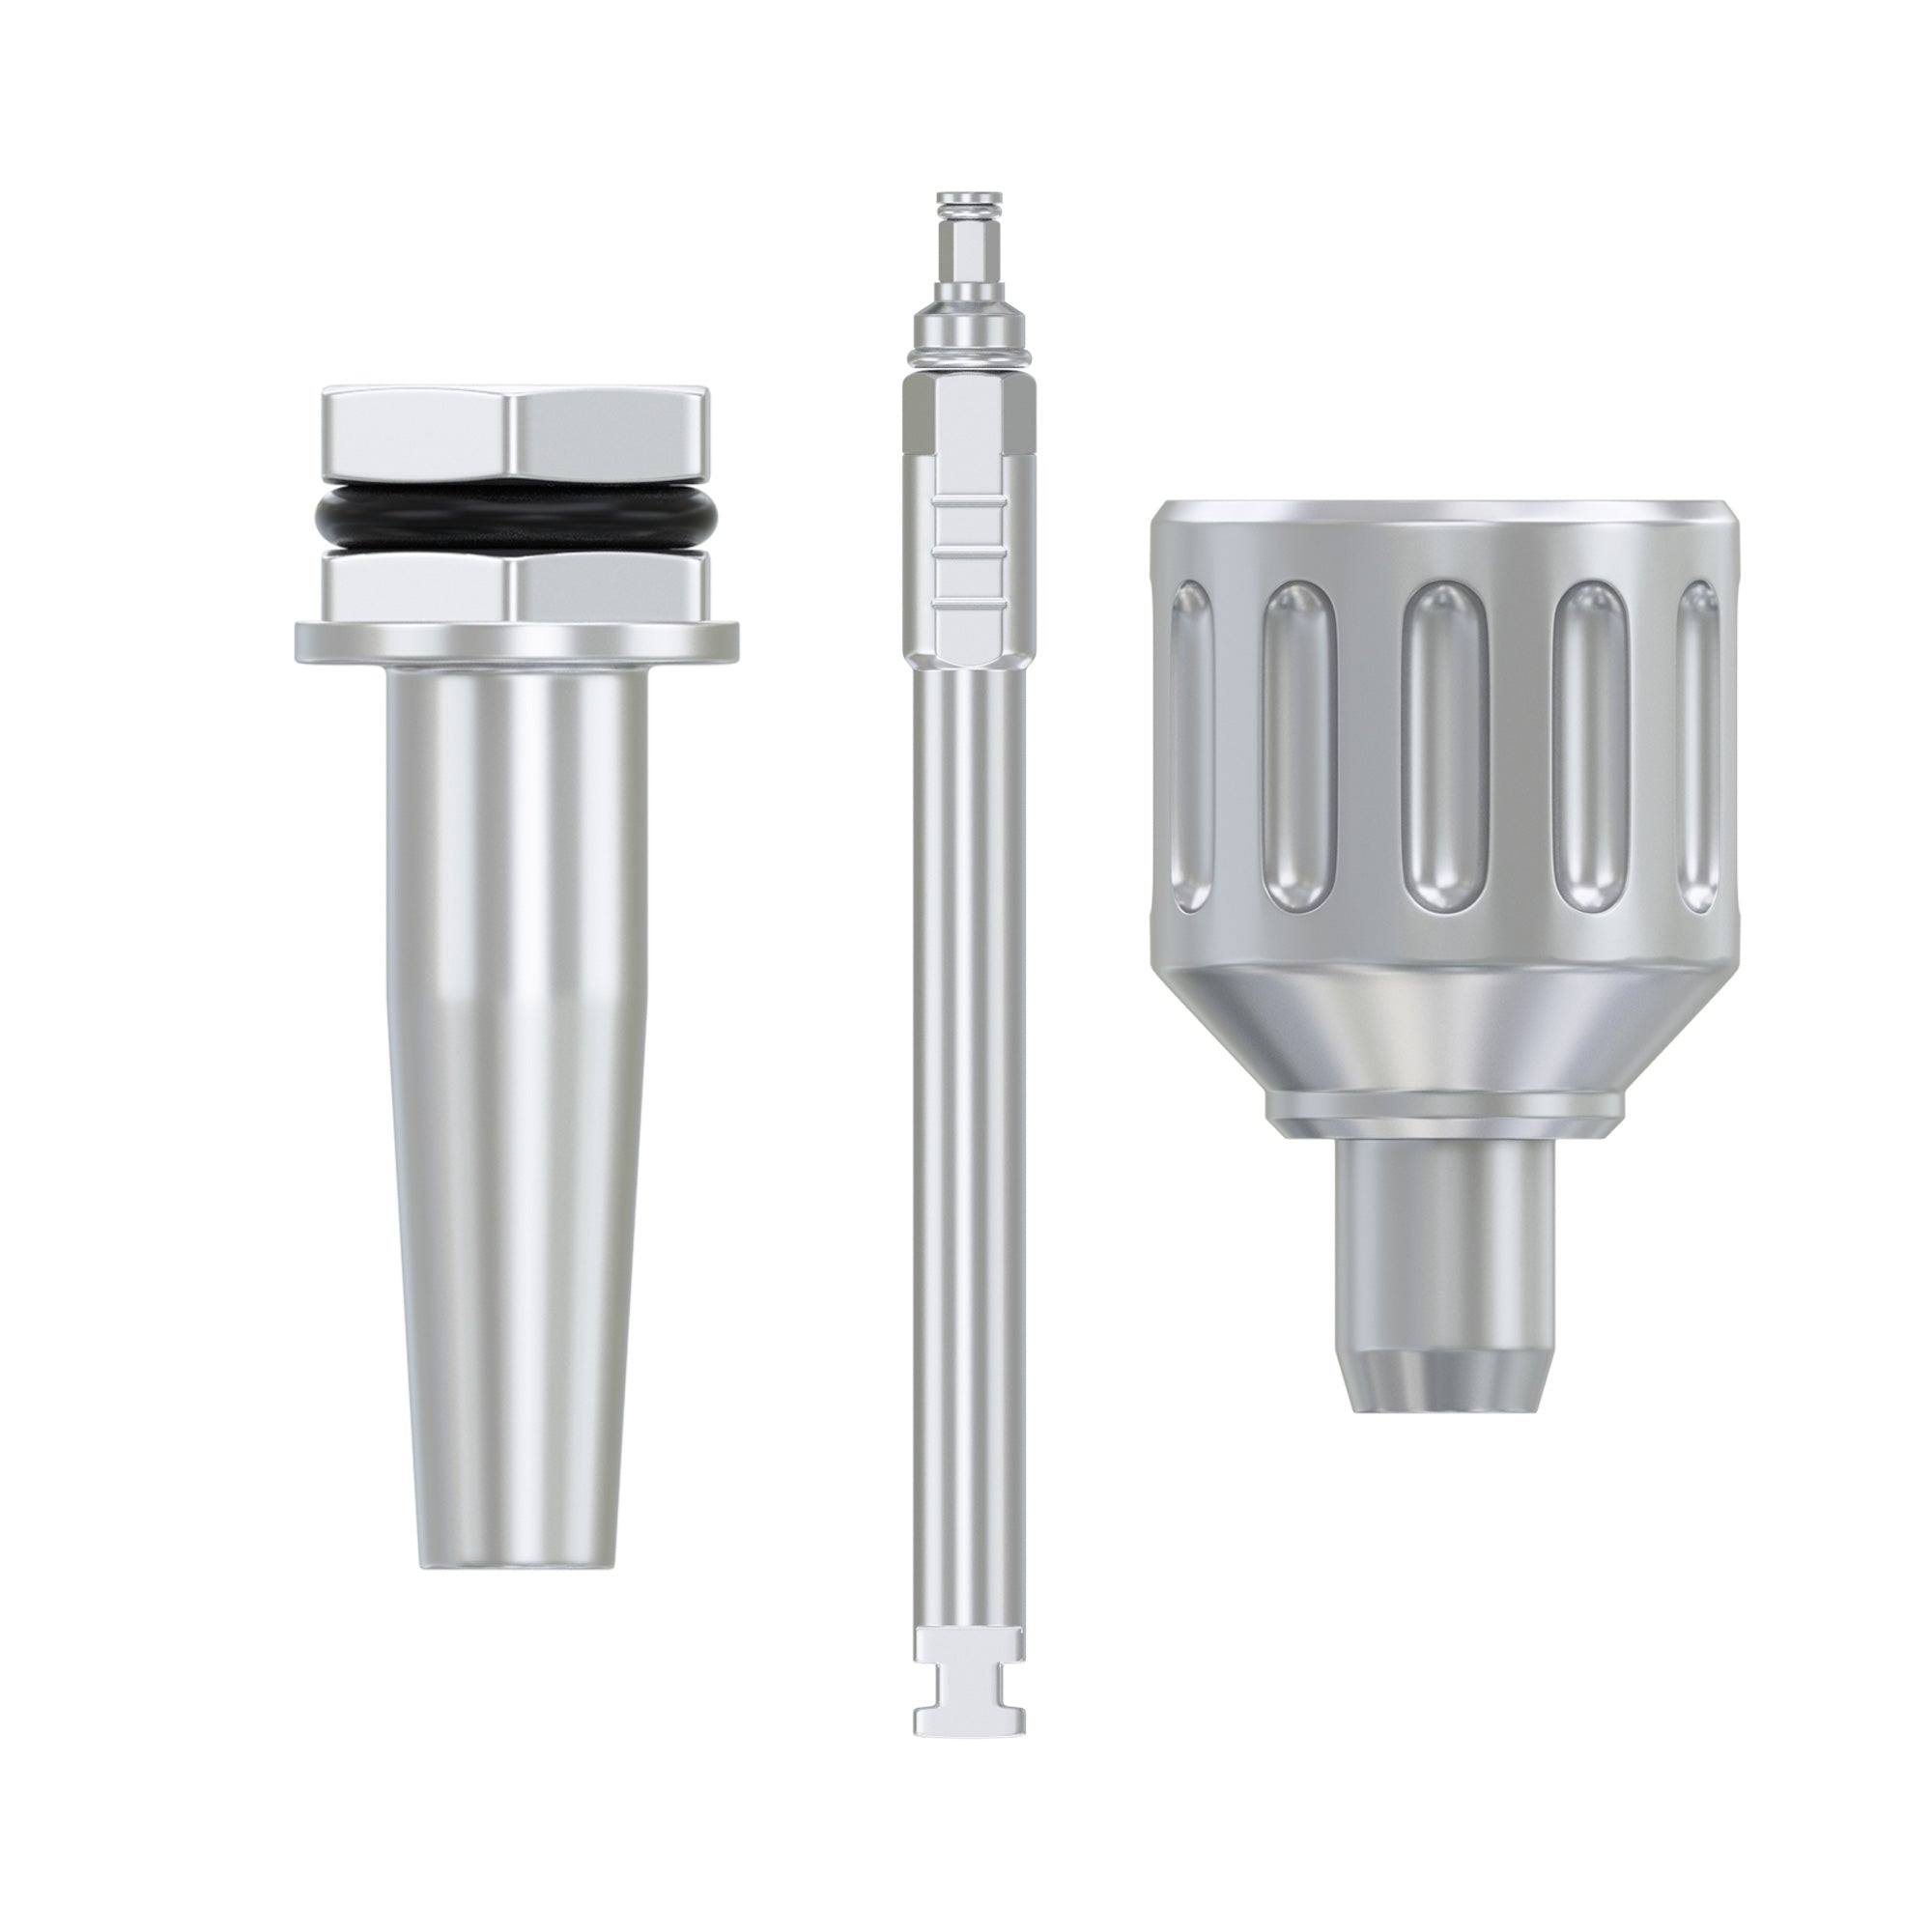 DSI Universal Driver All-In-One - For Implants And Prosthetics